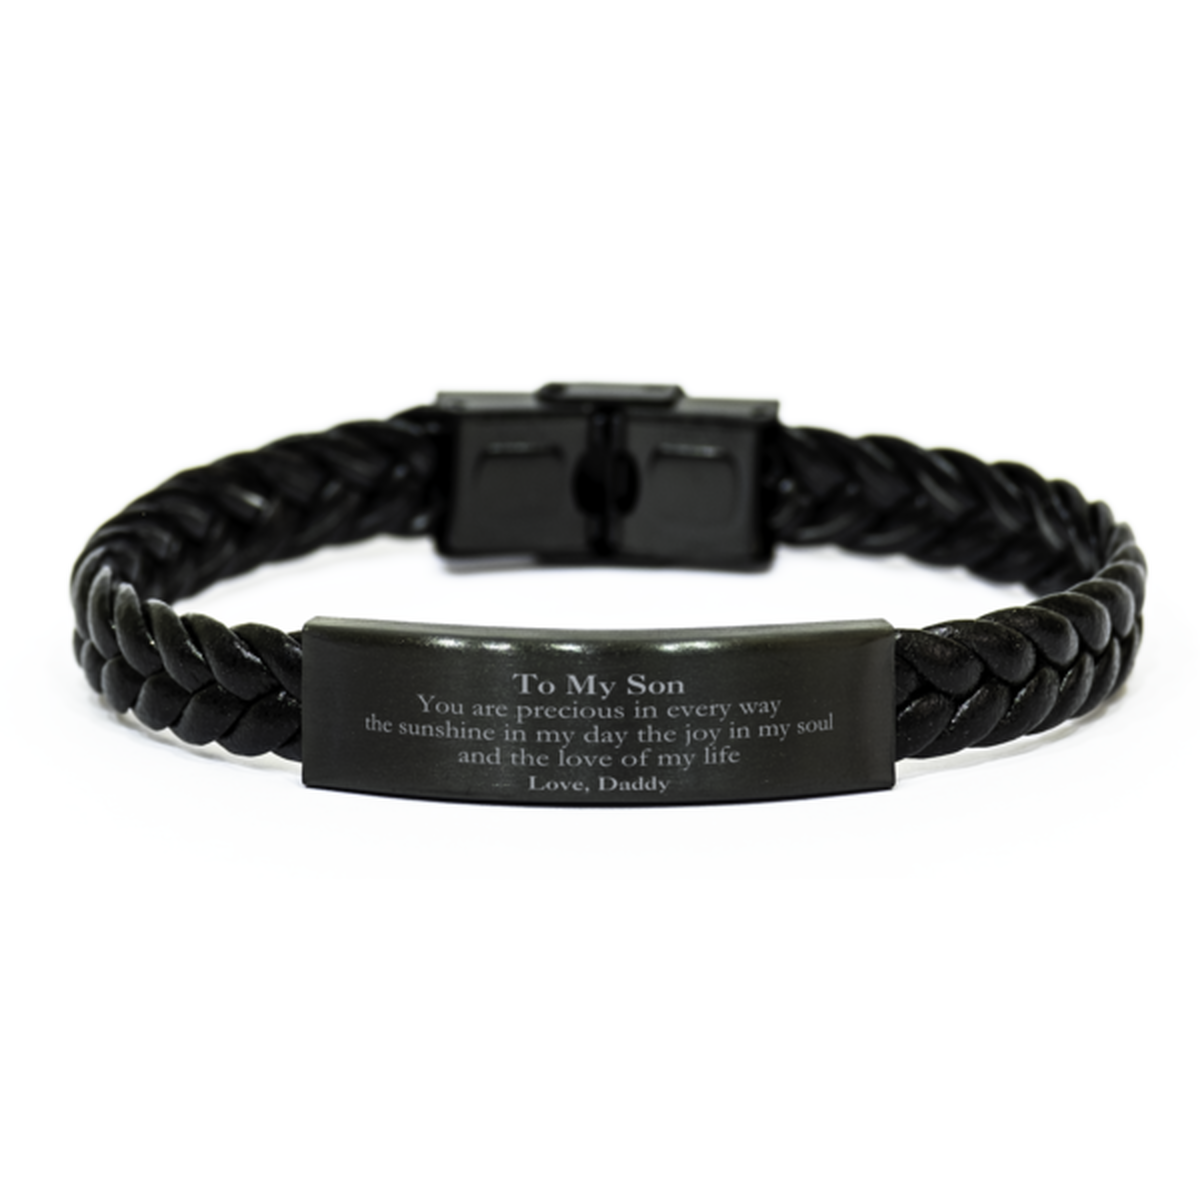 Graduation Gifts for Son Braided Leather Bracelet Present from Daddy, Christmas Son Birthday Gifts Son You are precious in every way the sunshine in my day. Love, Daddy